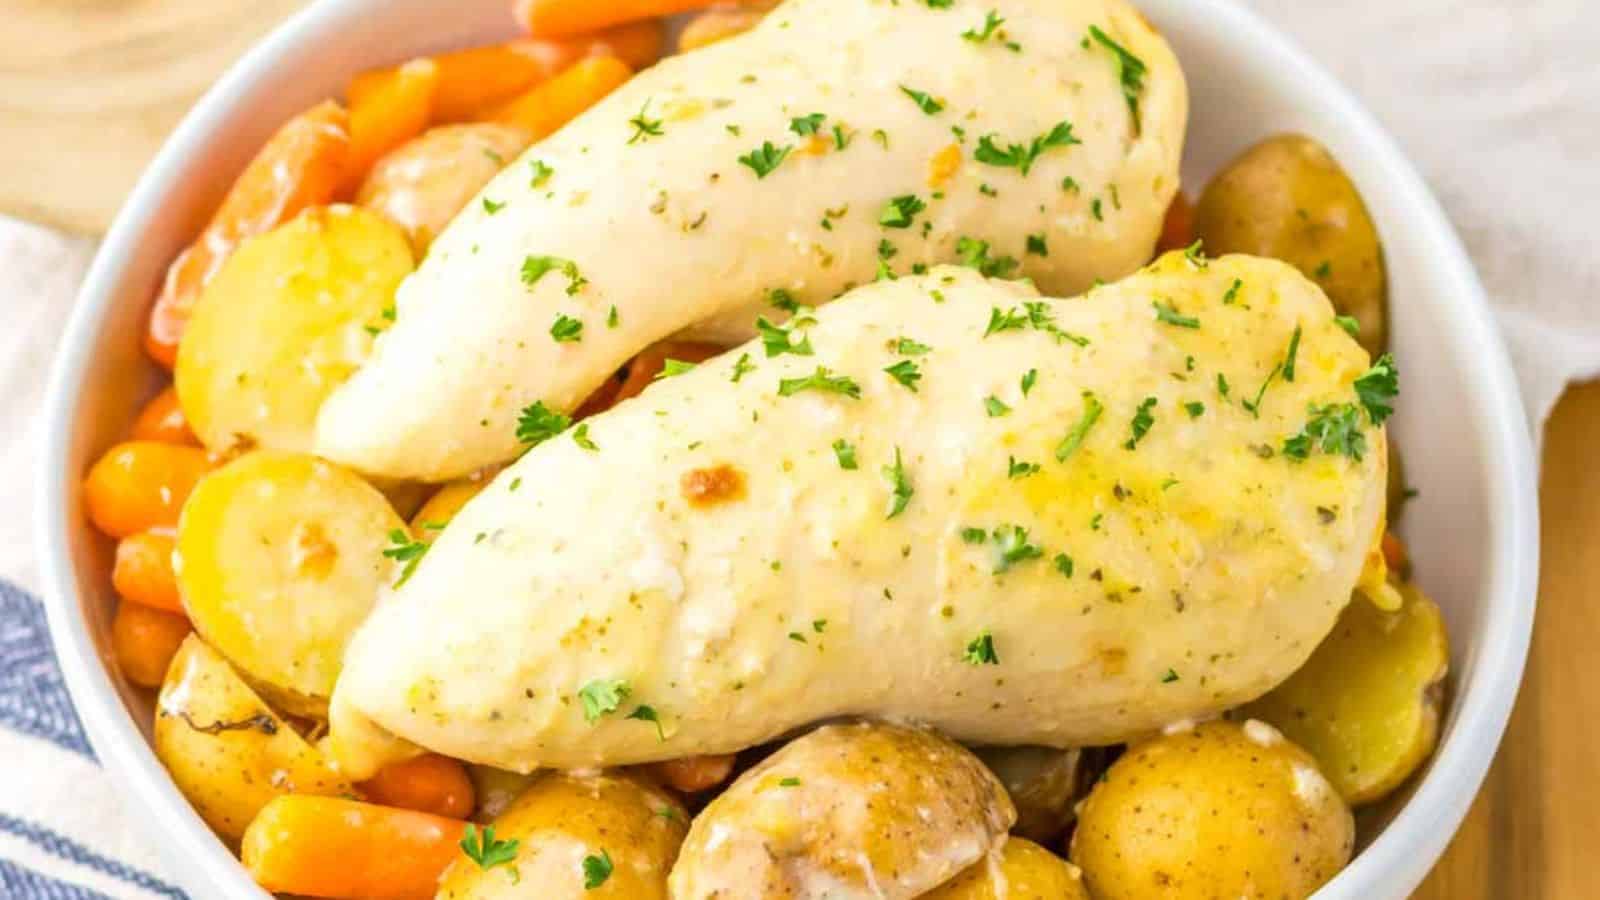 A dish of seasoned chicken breasts garnished with parsley, surrounded by carrots and potatoes in a bowl.